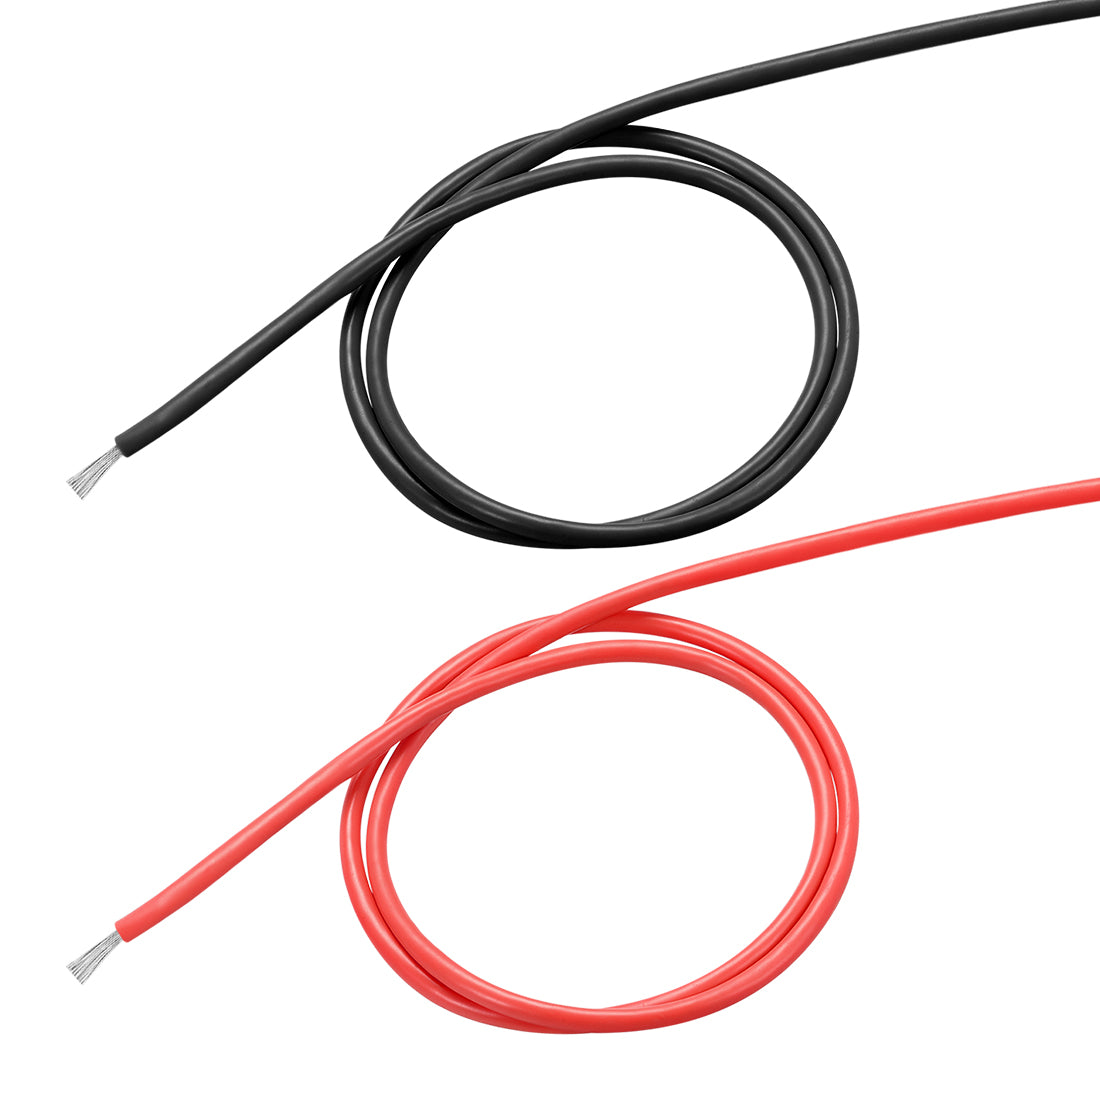 uxcell Uxcell Silicone Wire 28 AWG Electric Wire Strands of Tinned Copper Wire 16 ft Black Red